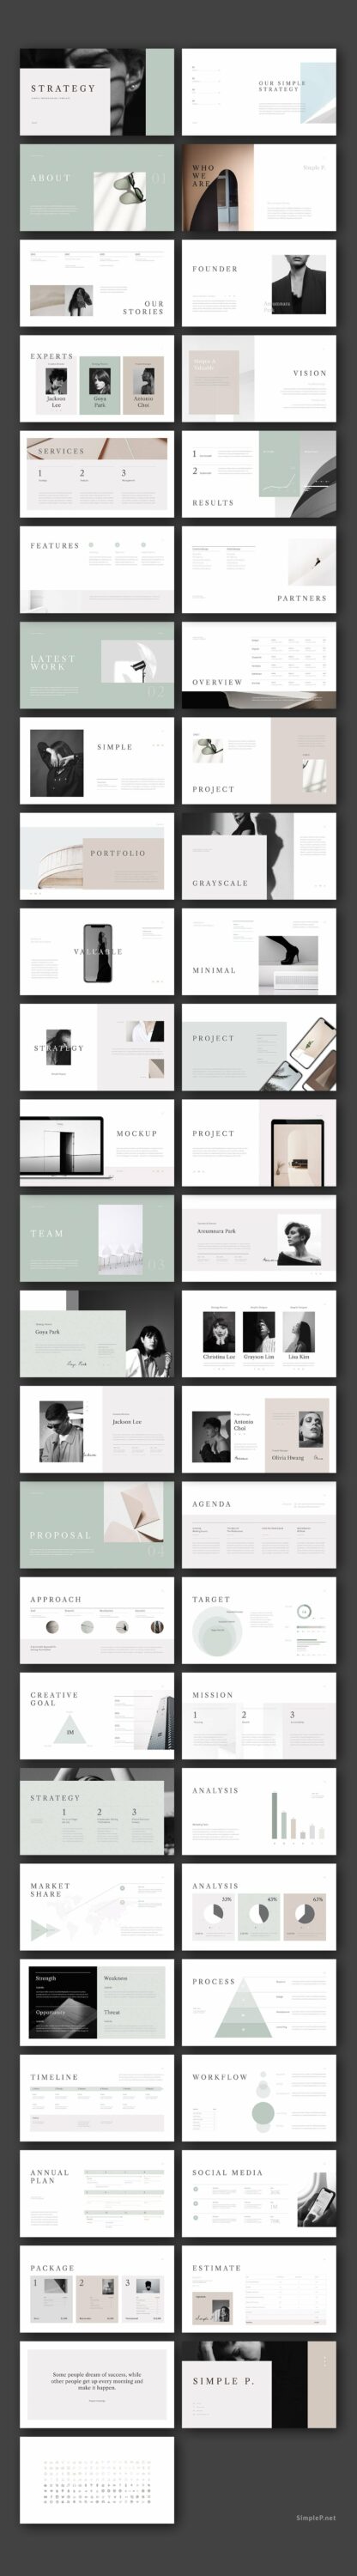 This template has simple, clean and minimalist design concept.